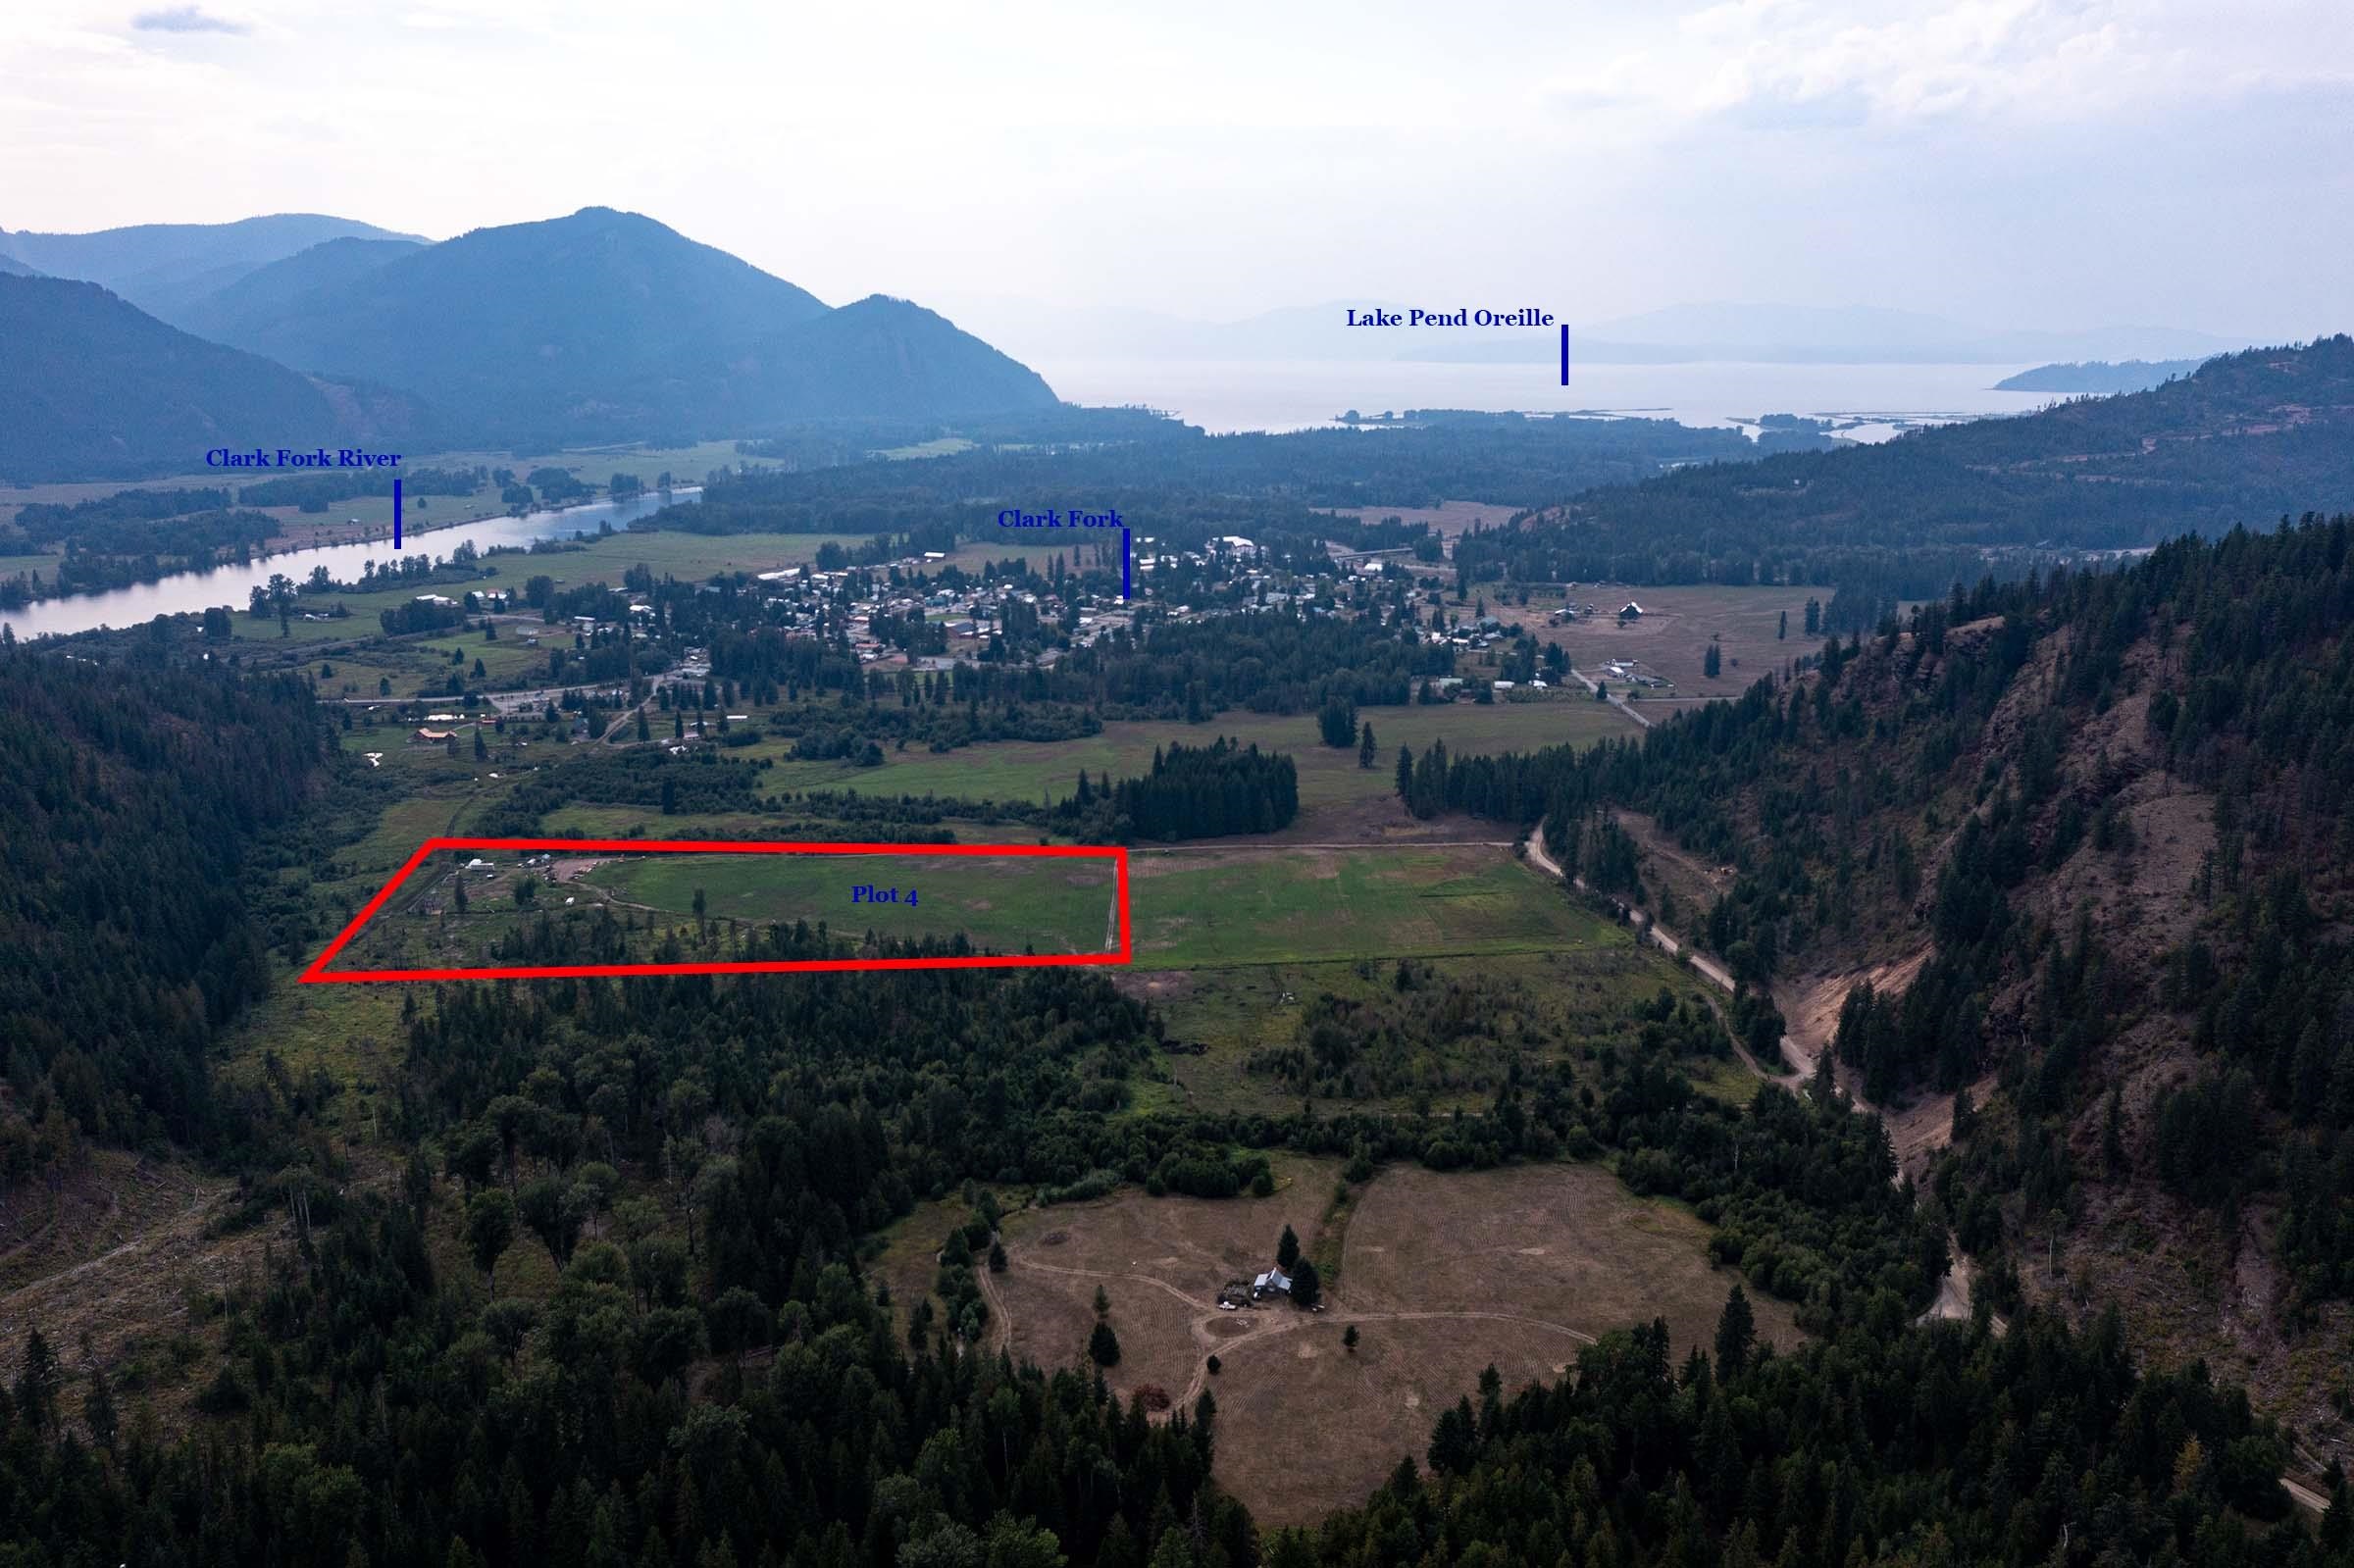 388 Mosquito Creel Rd. Lot 4, Clark Fork, ID 83811